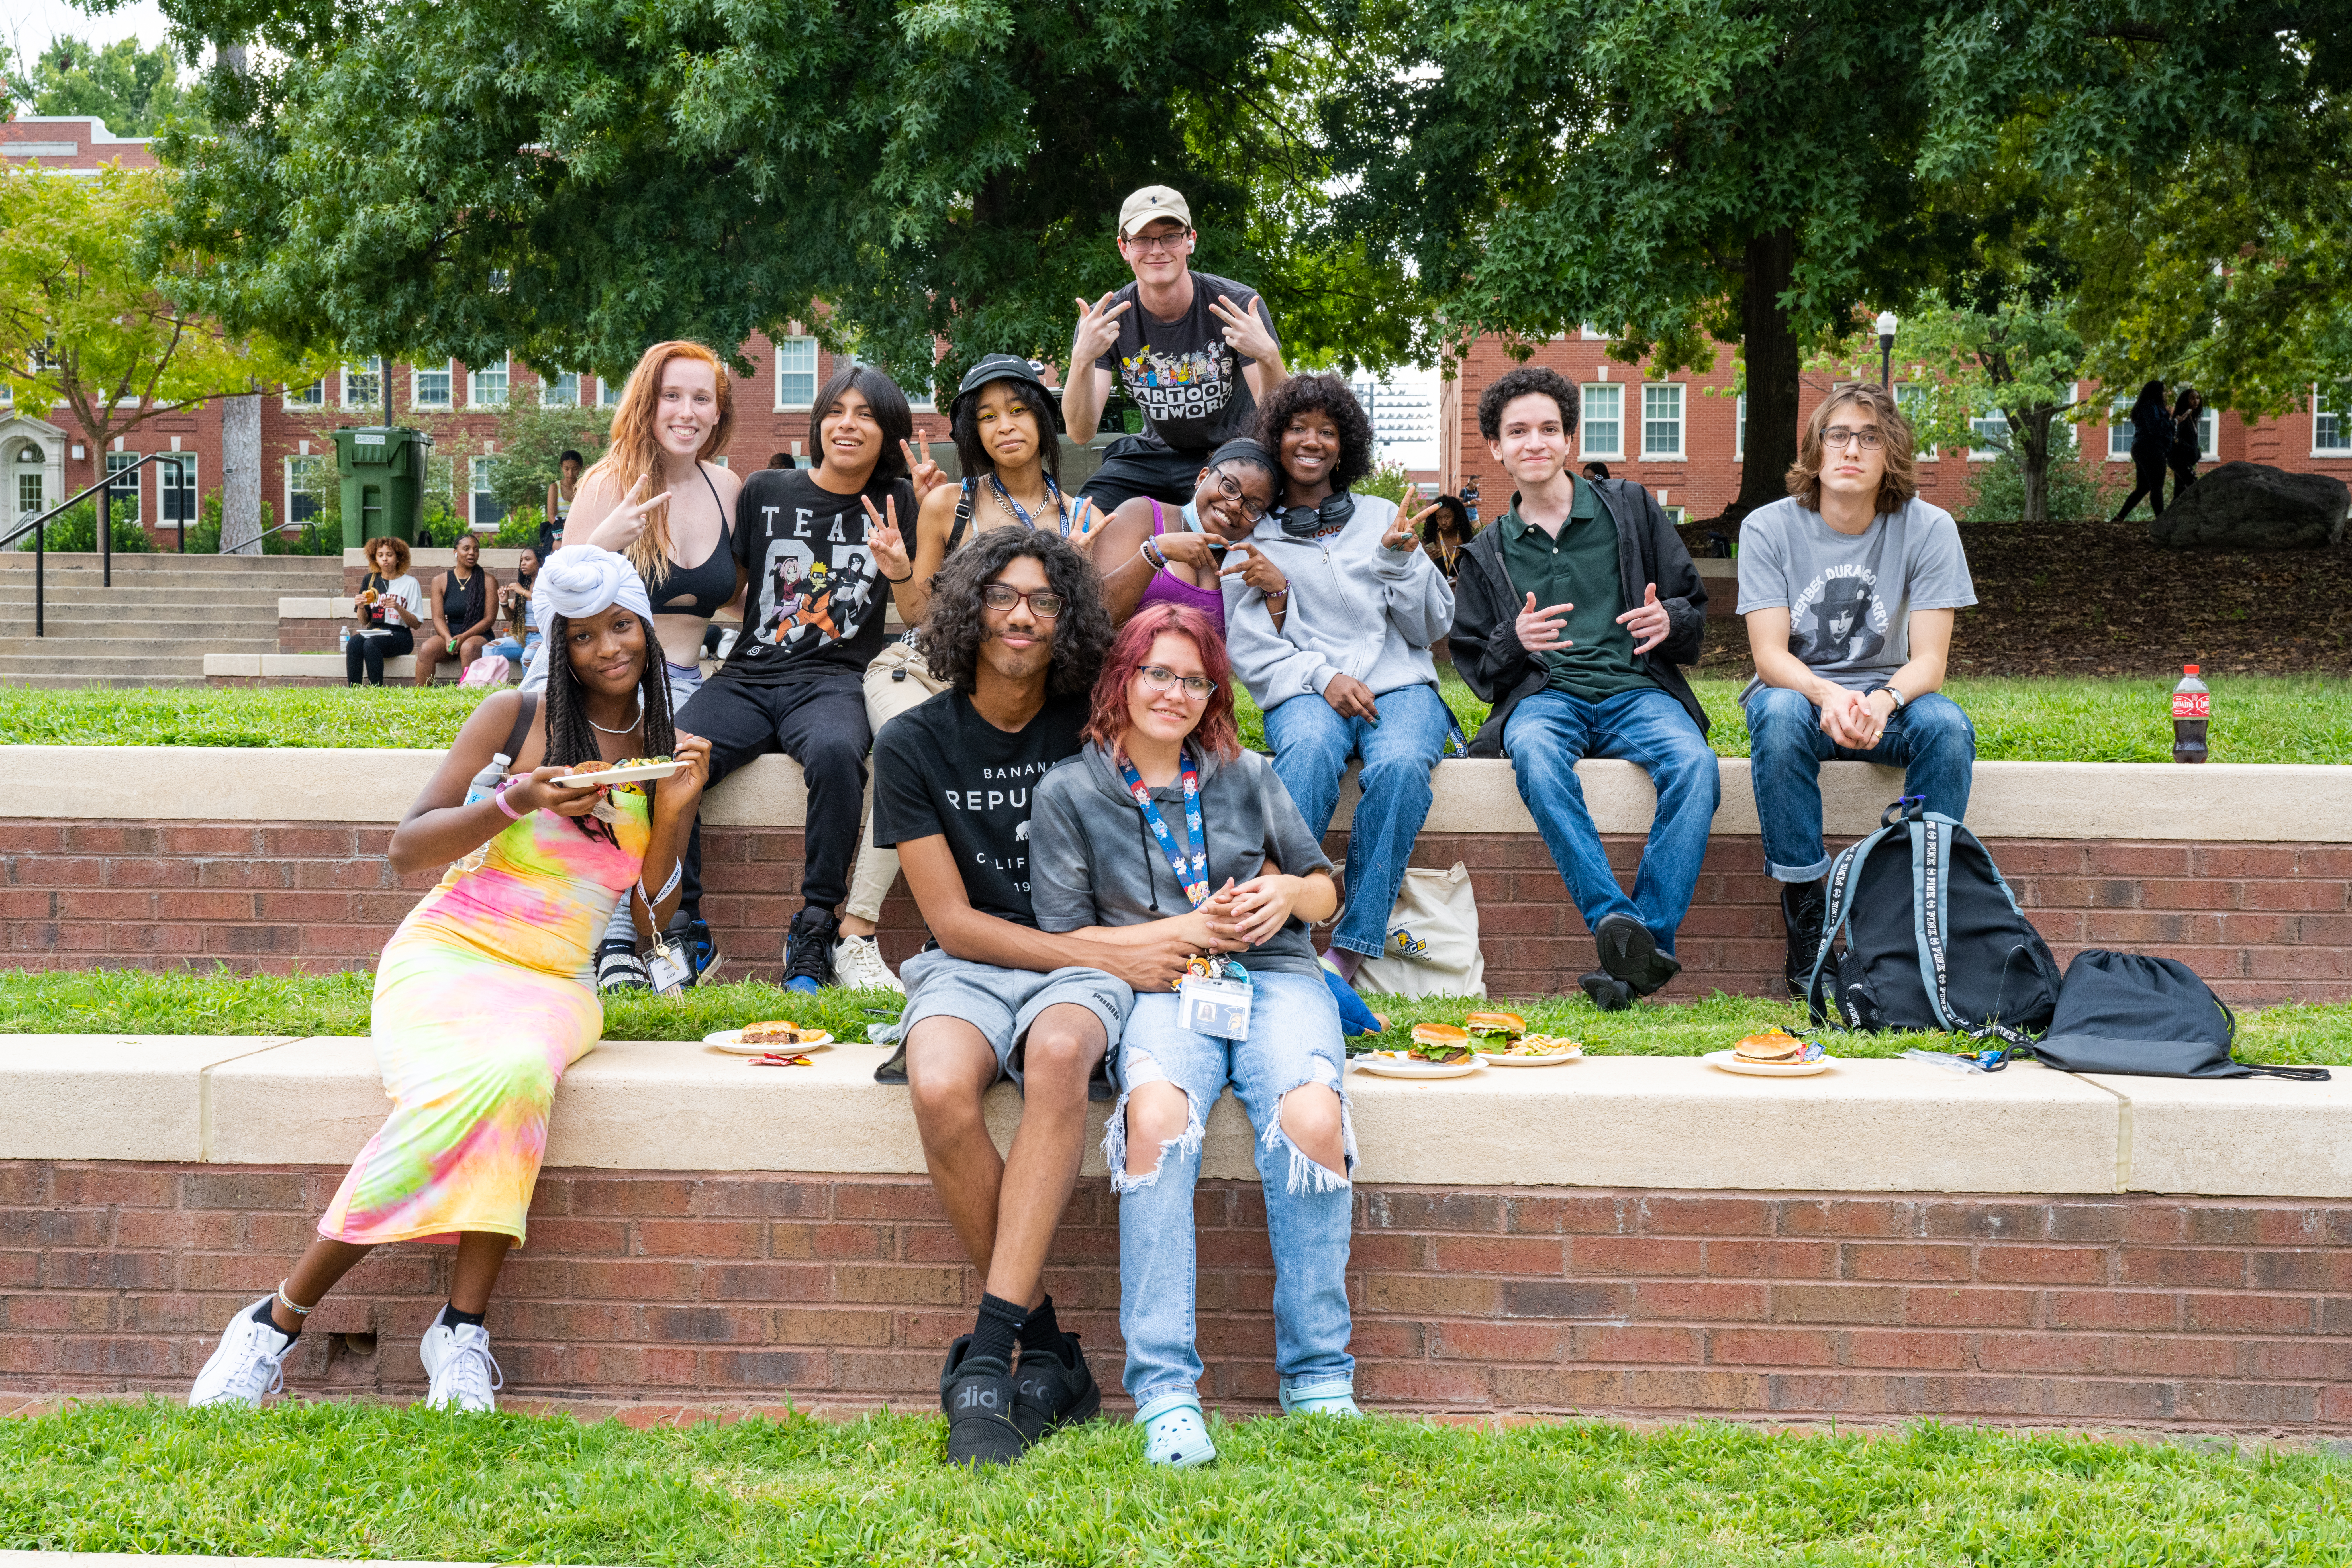 A diverse group of students sitting outside on the grass with plates of food smiling at the camera.